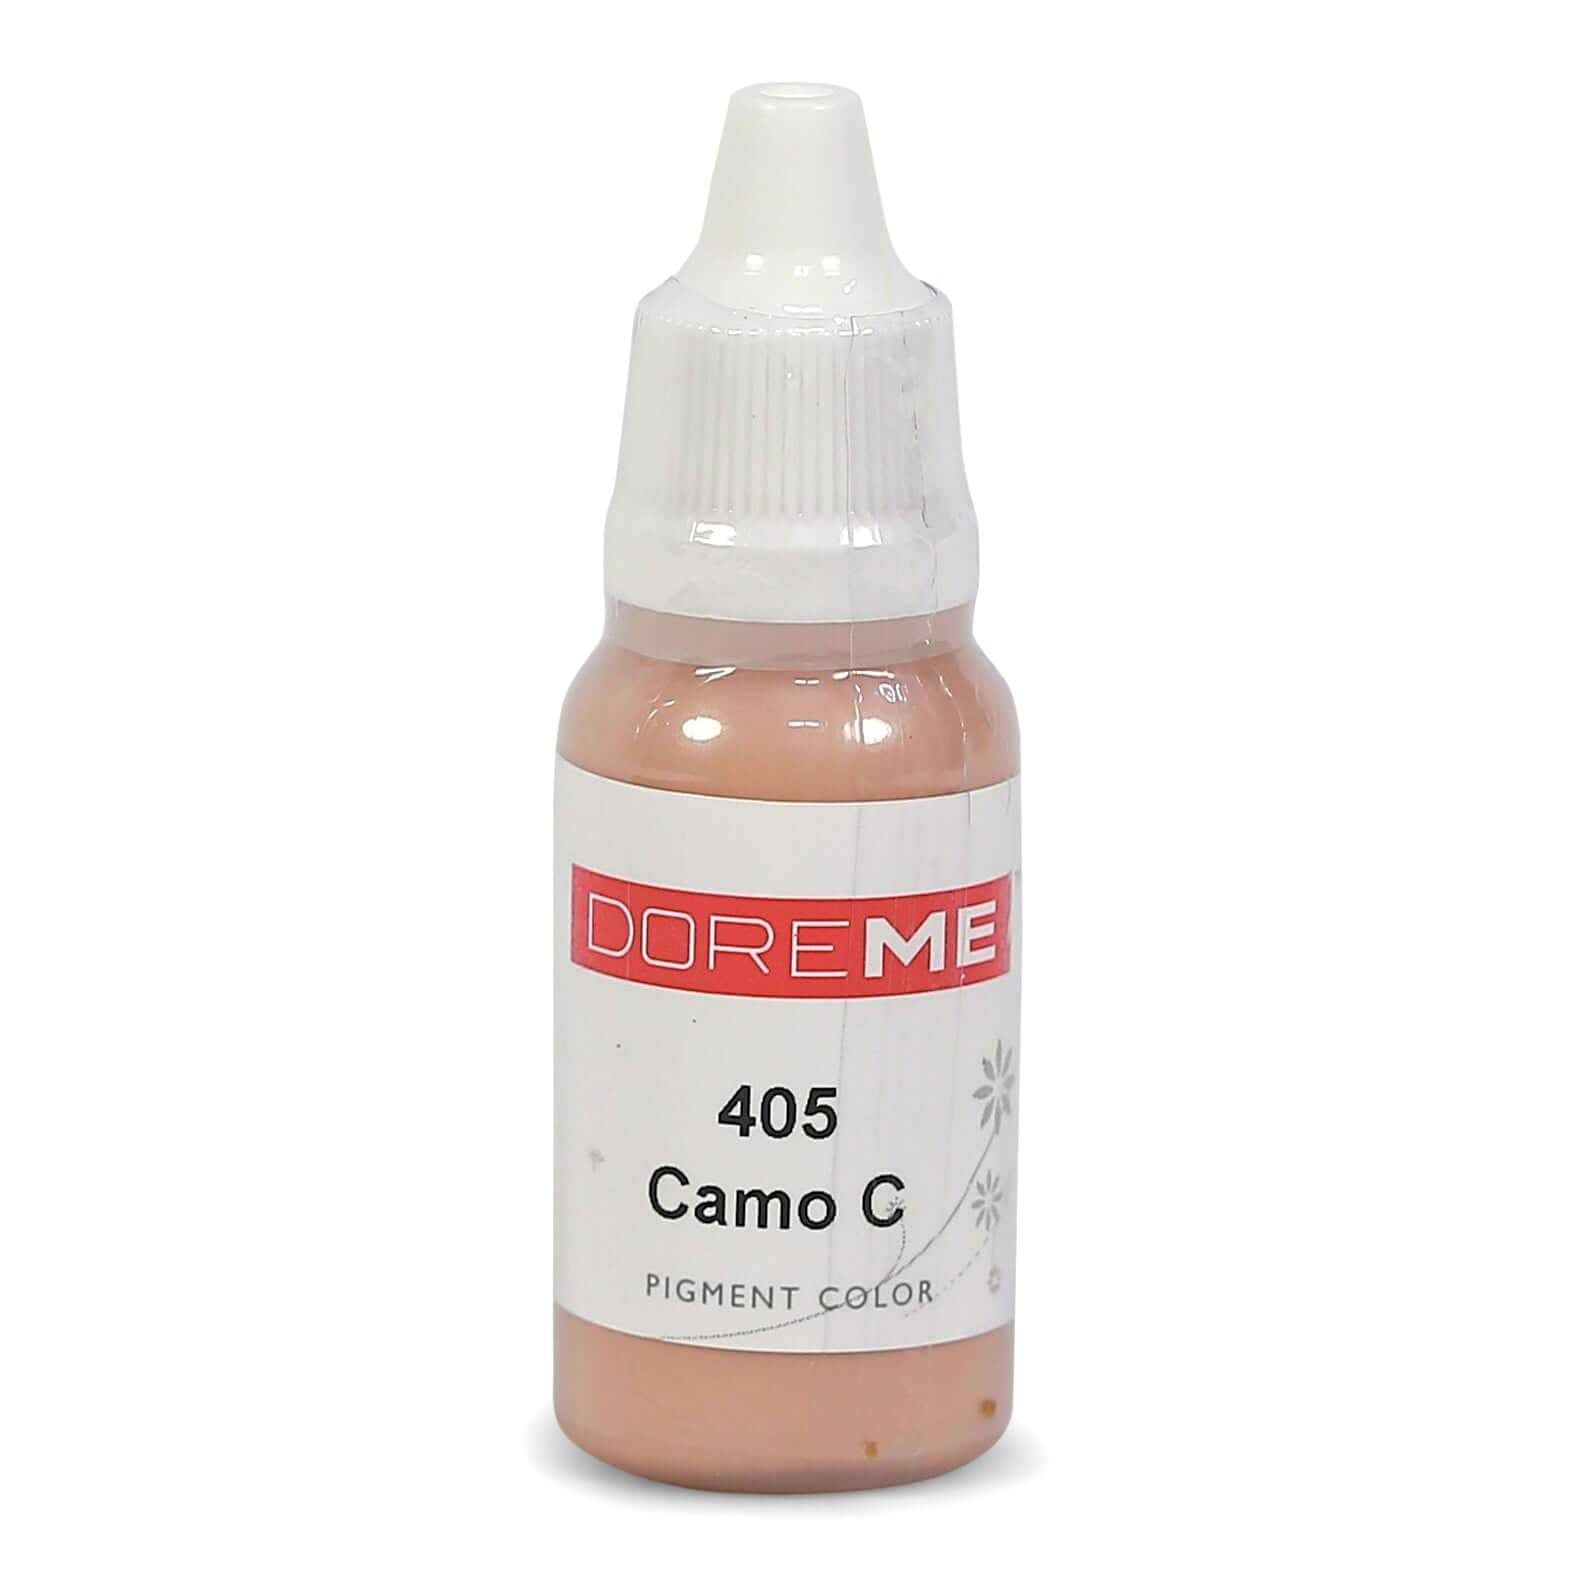 Doreme Skin Camouflage Pigments 405 Camo C (w) - Beautiful Ink UK trade and wholesale supplier